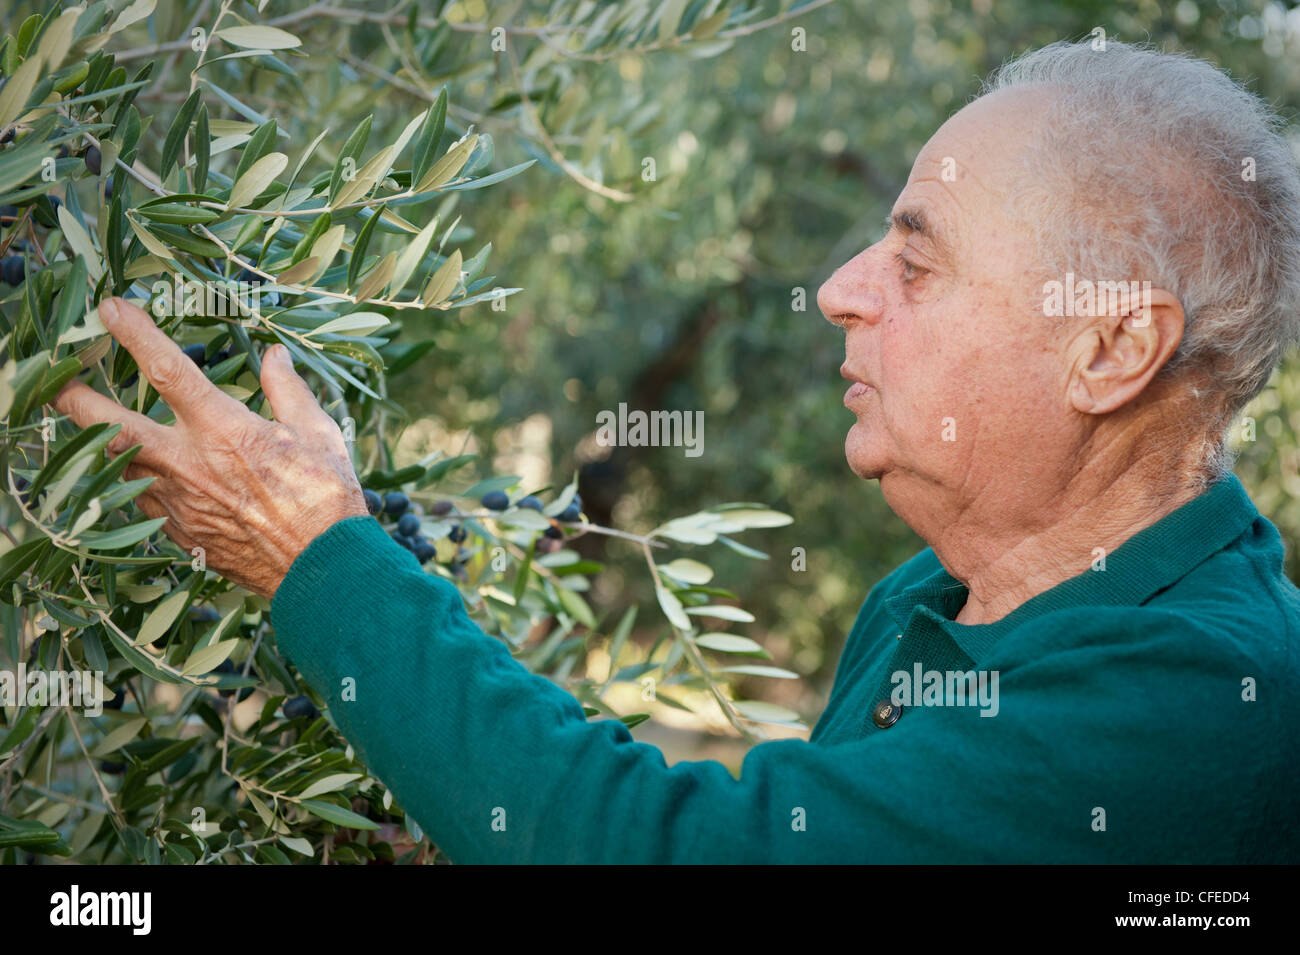 Italian olive farmer showing olives on trees in grove in Montecarotto, Ancona region of Italy Stock Photo